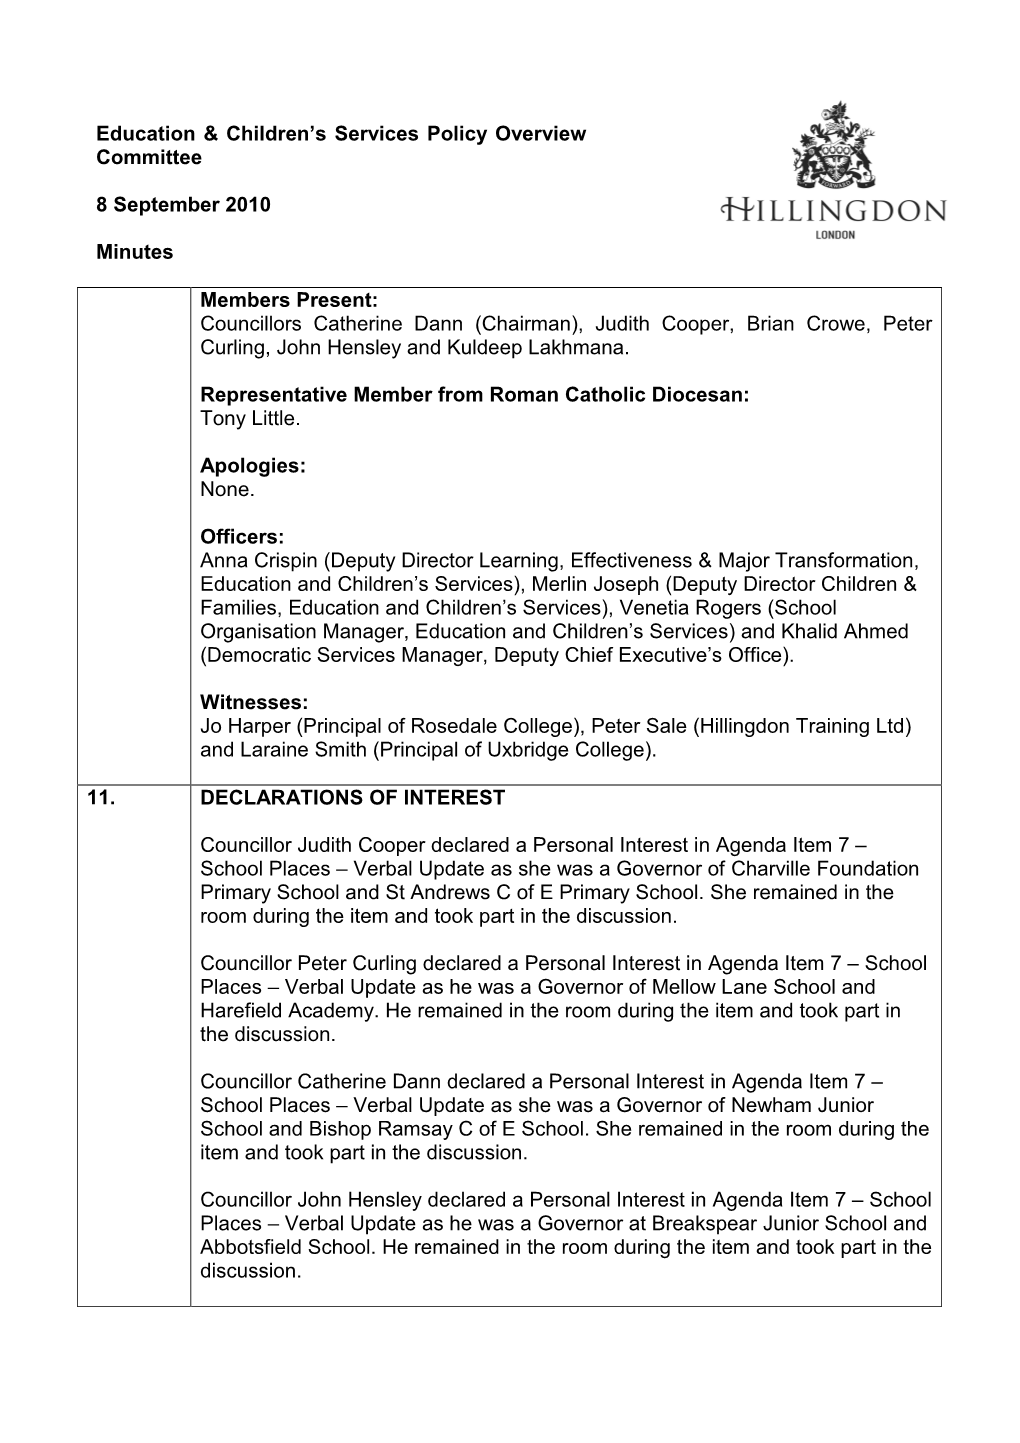 Education & Children's Services Policy Overview Committee 8